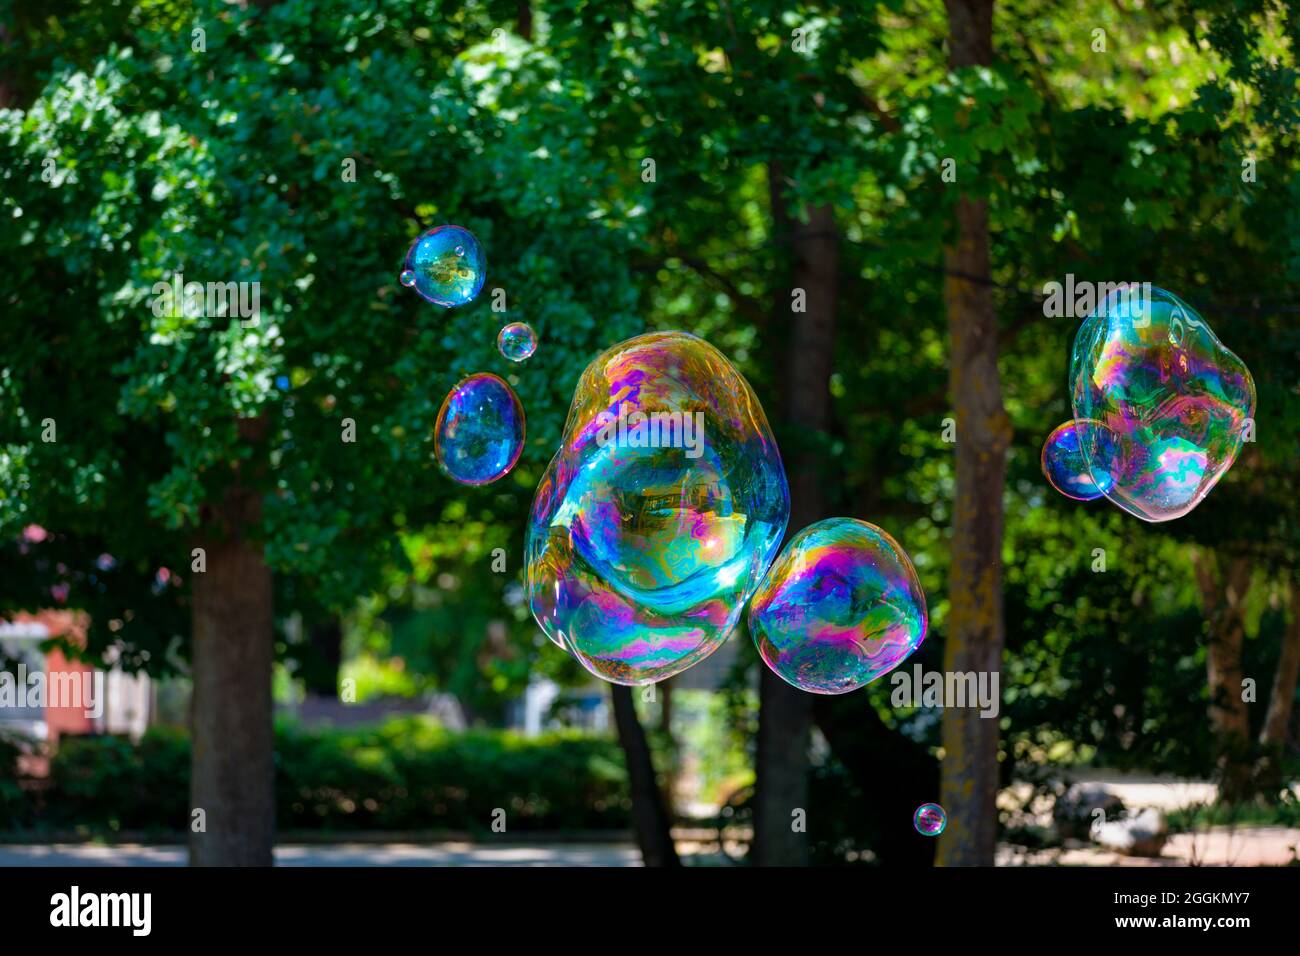 Iridescent soap bubbles float through the air, Mecklenburg-Western Pomerania, Germany Stock Photo